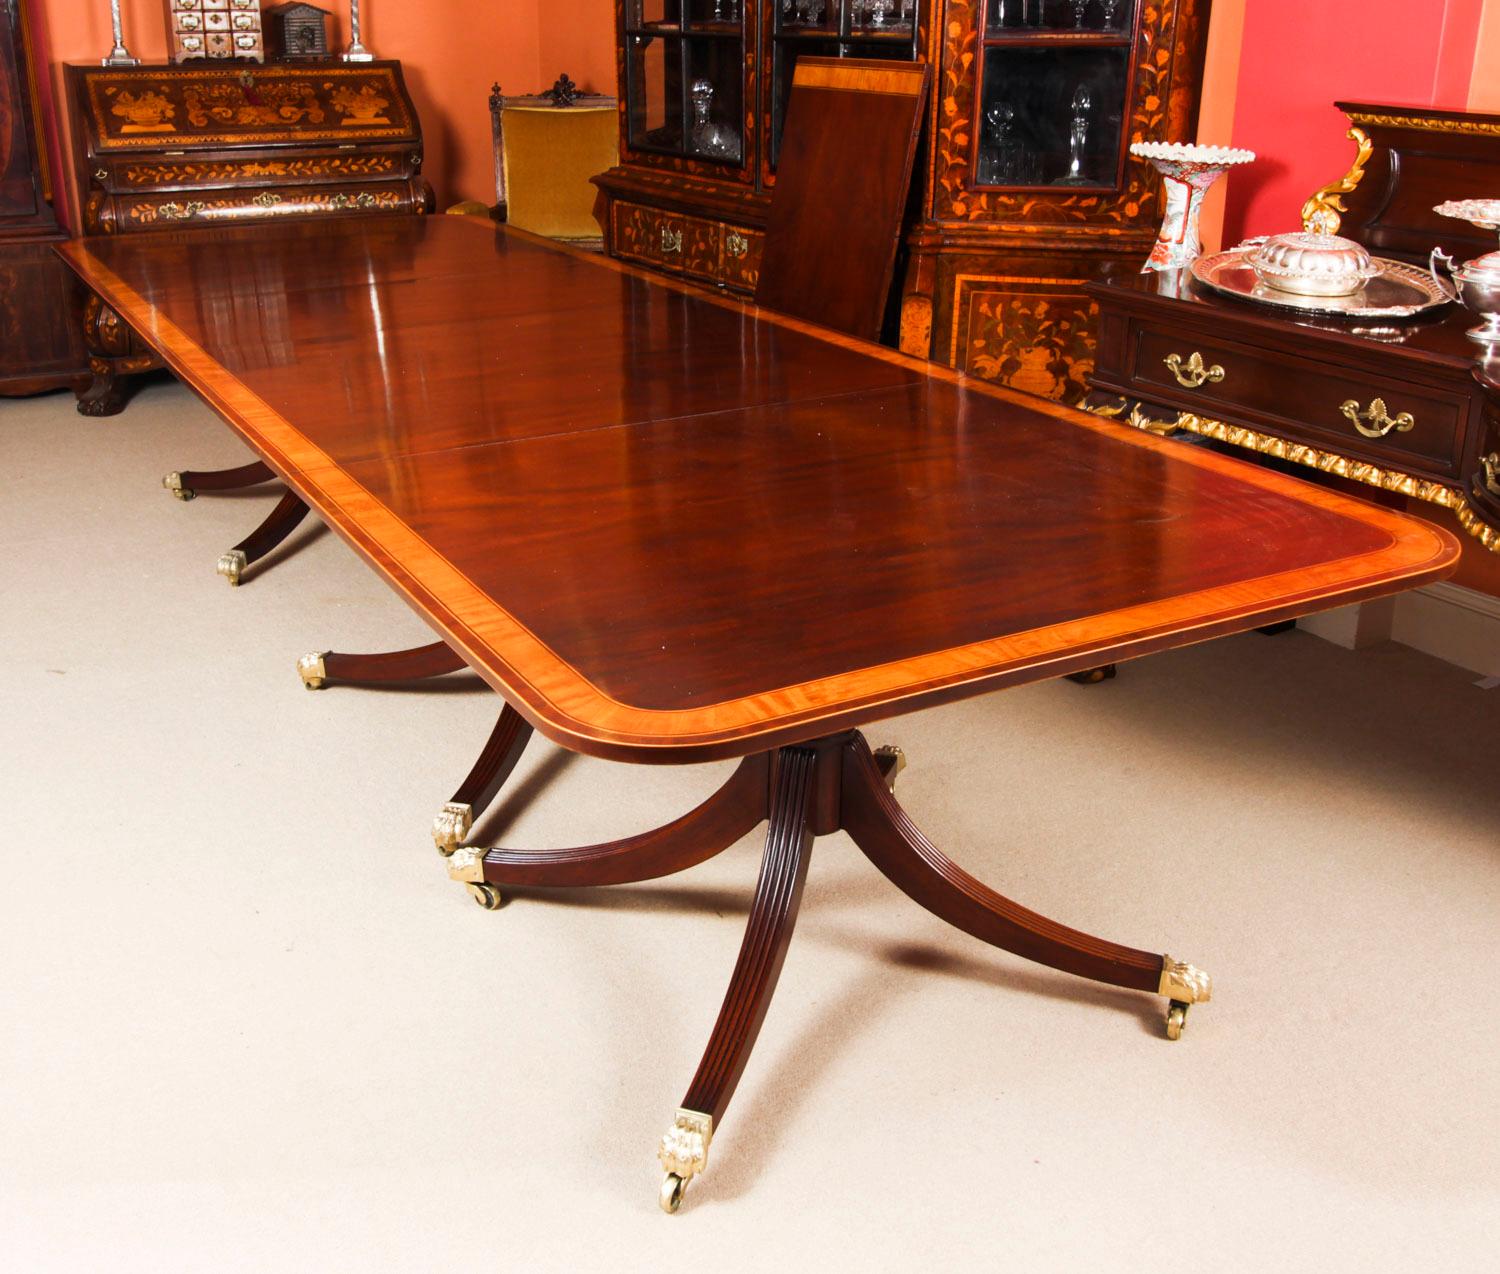 14 foot dining table